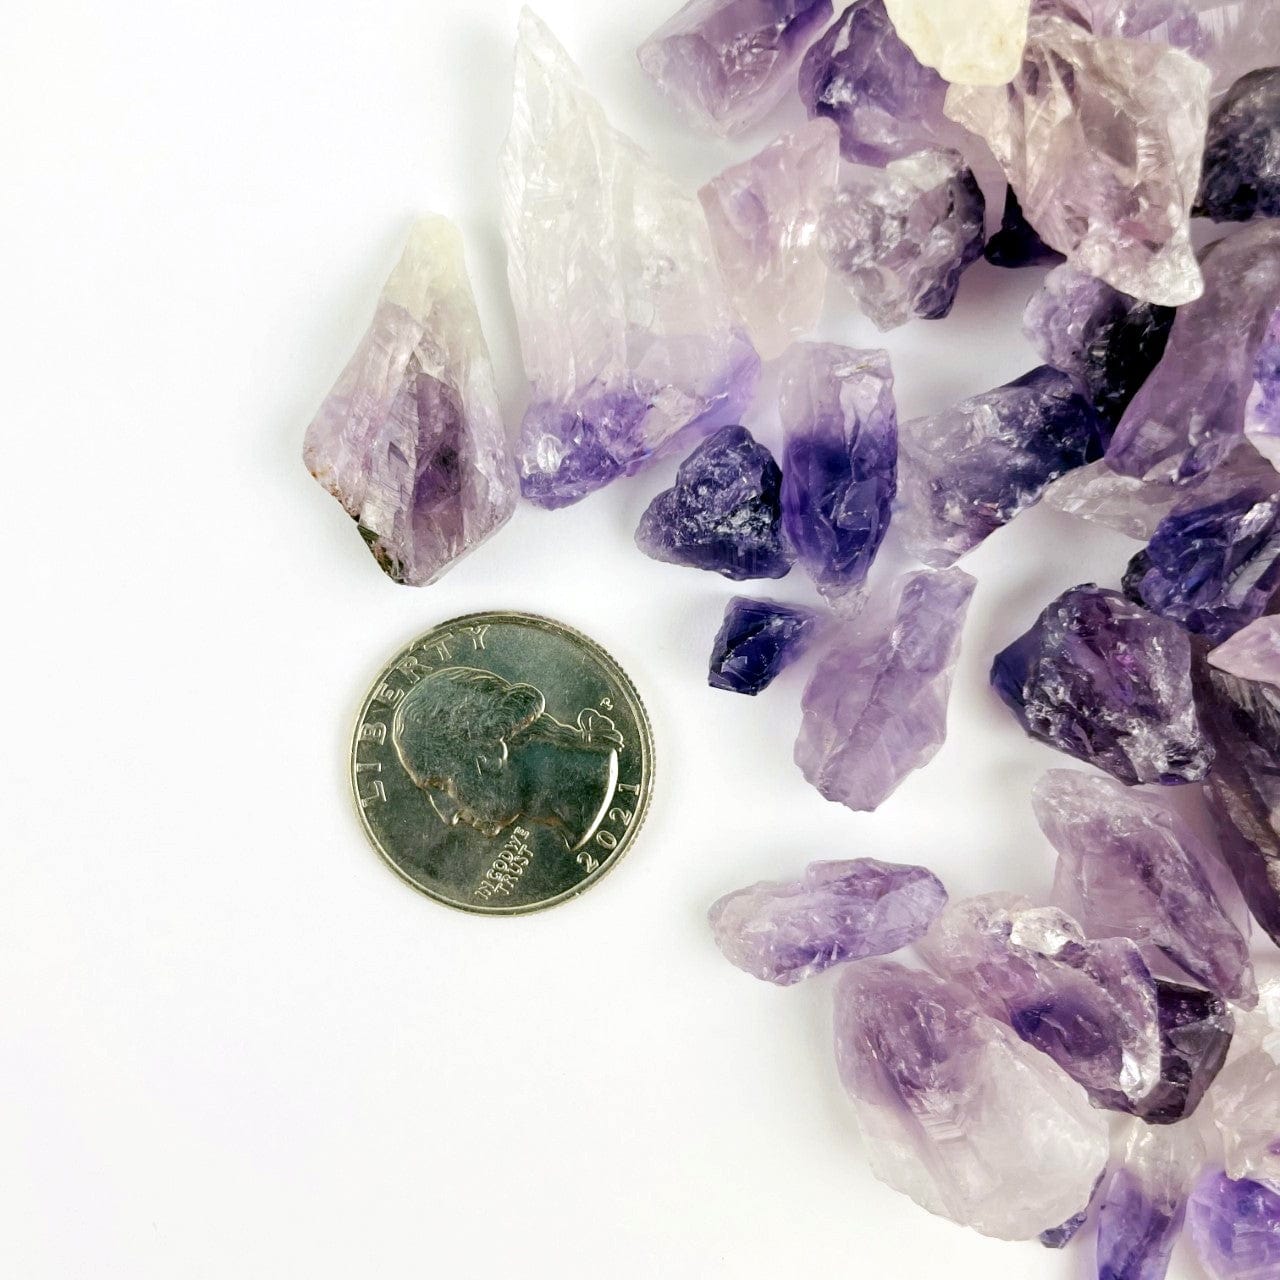 Amethyst Points - Chubbie Box of Stones shown next to a quarter for size